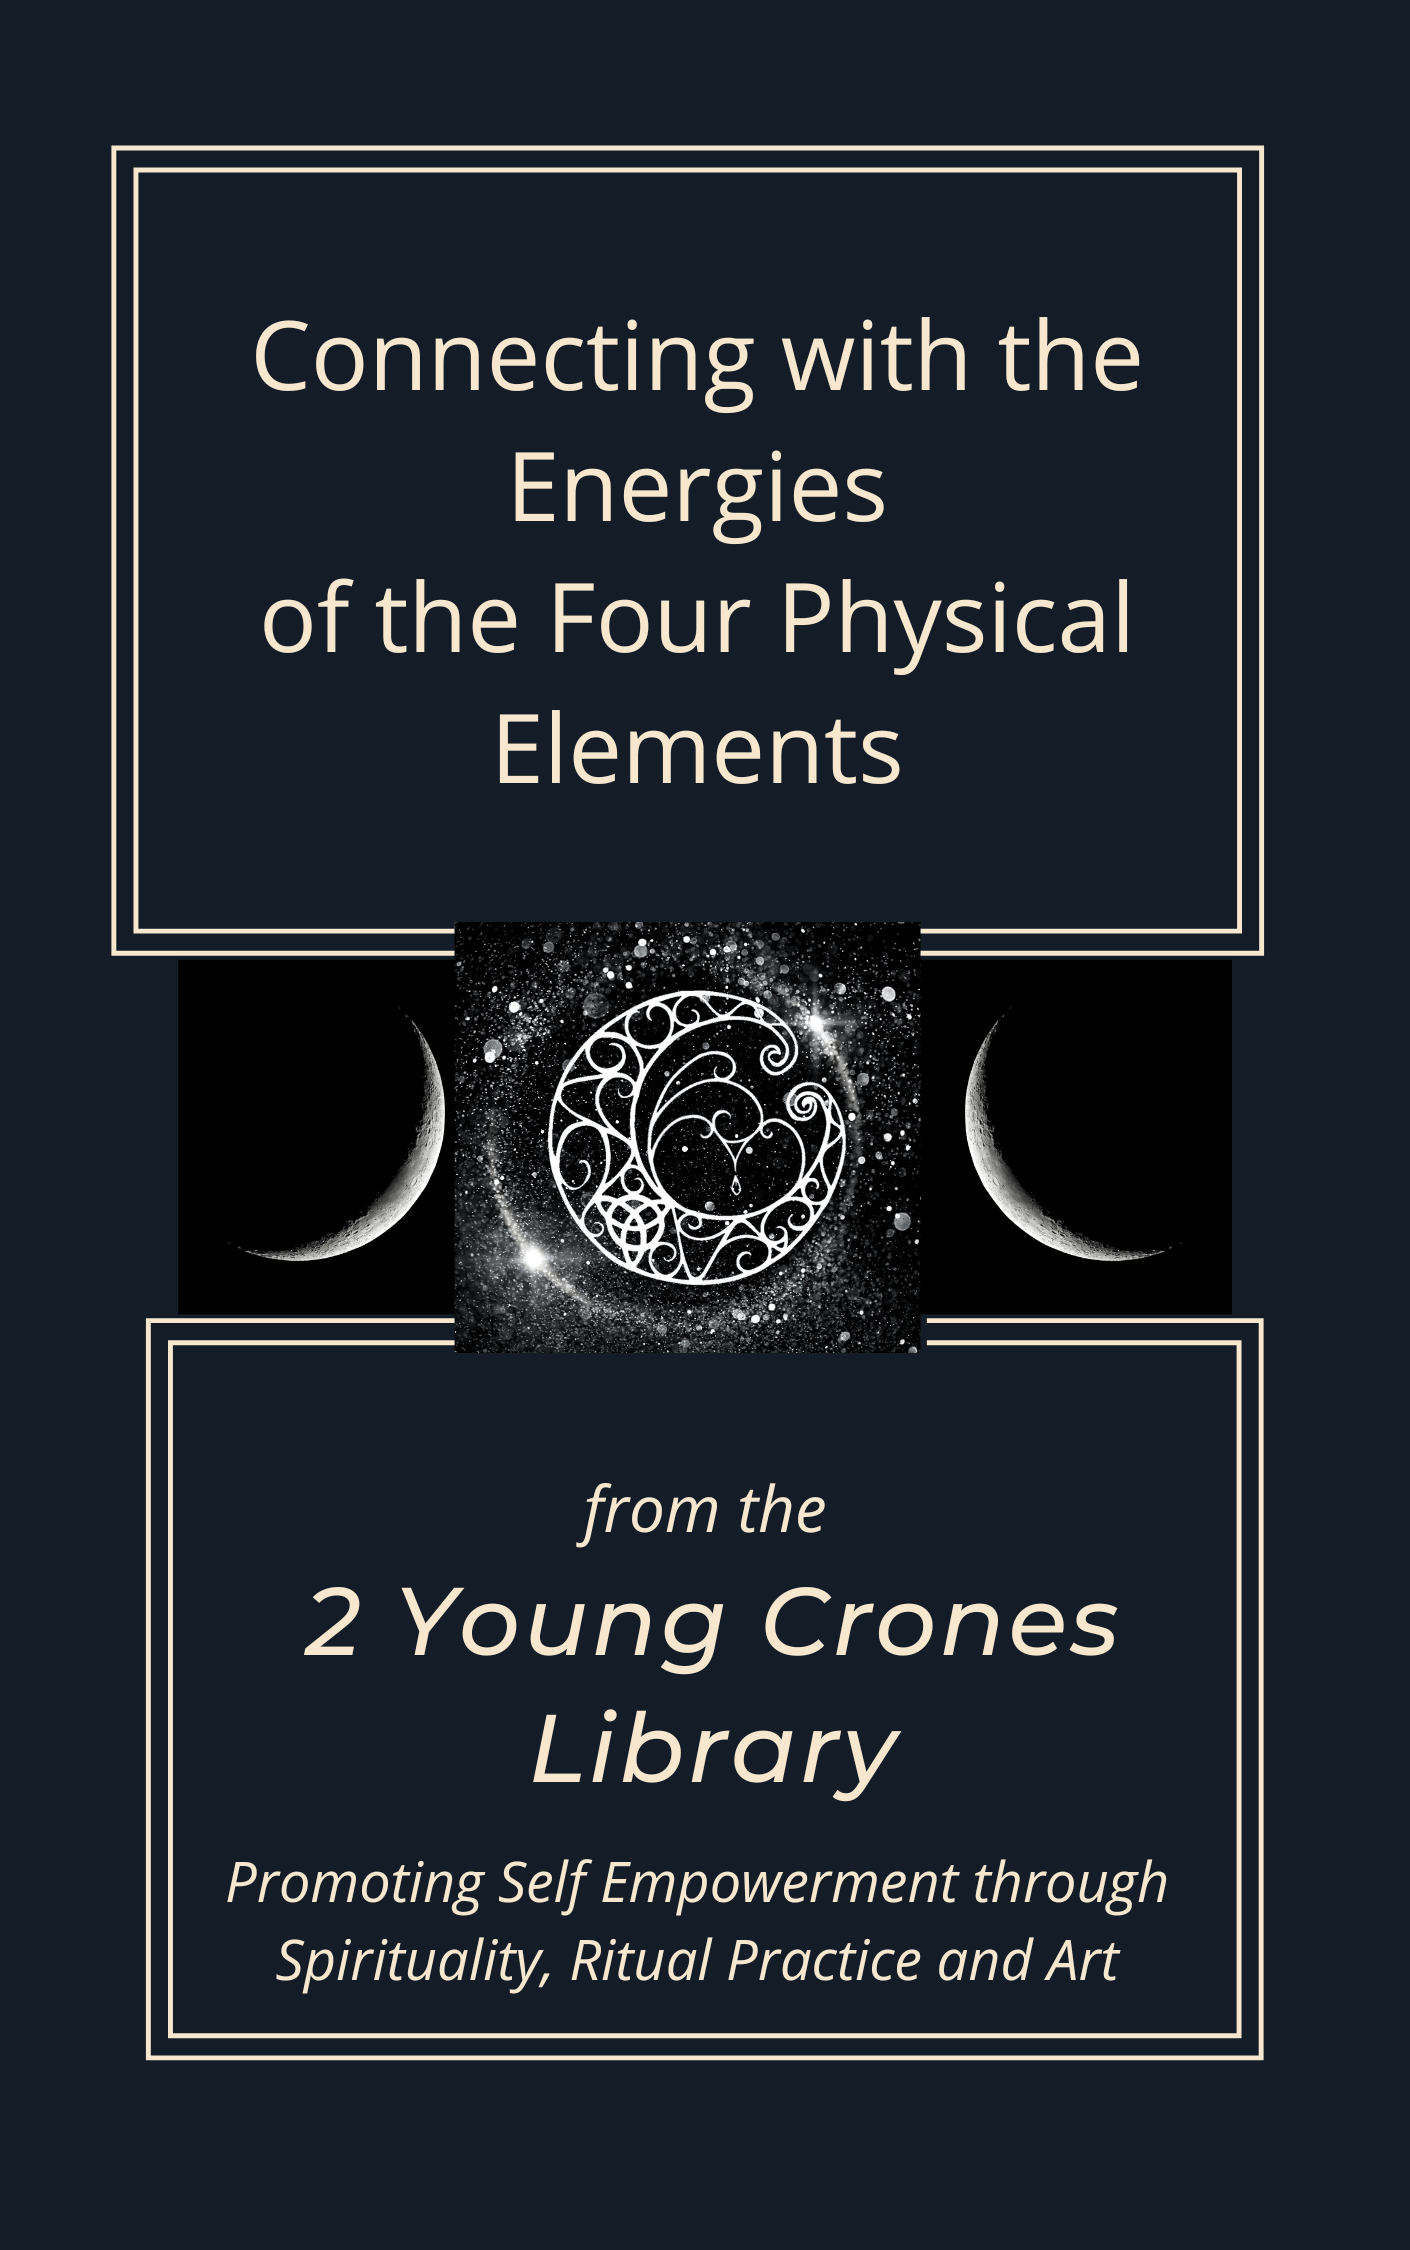 Connecting with the Energies of the Four Physical Elements